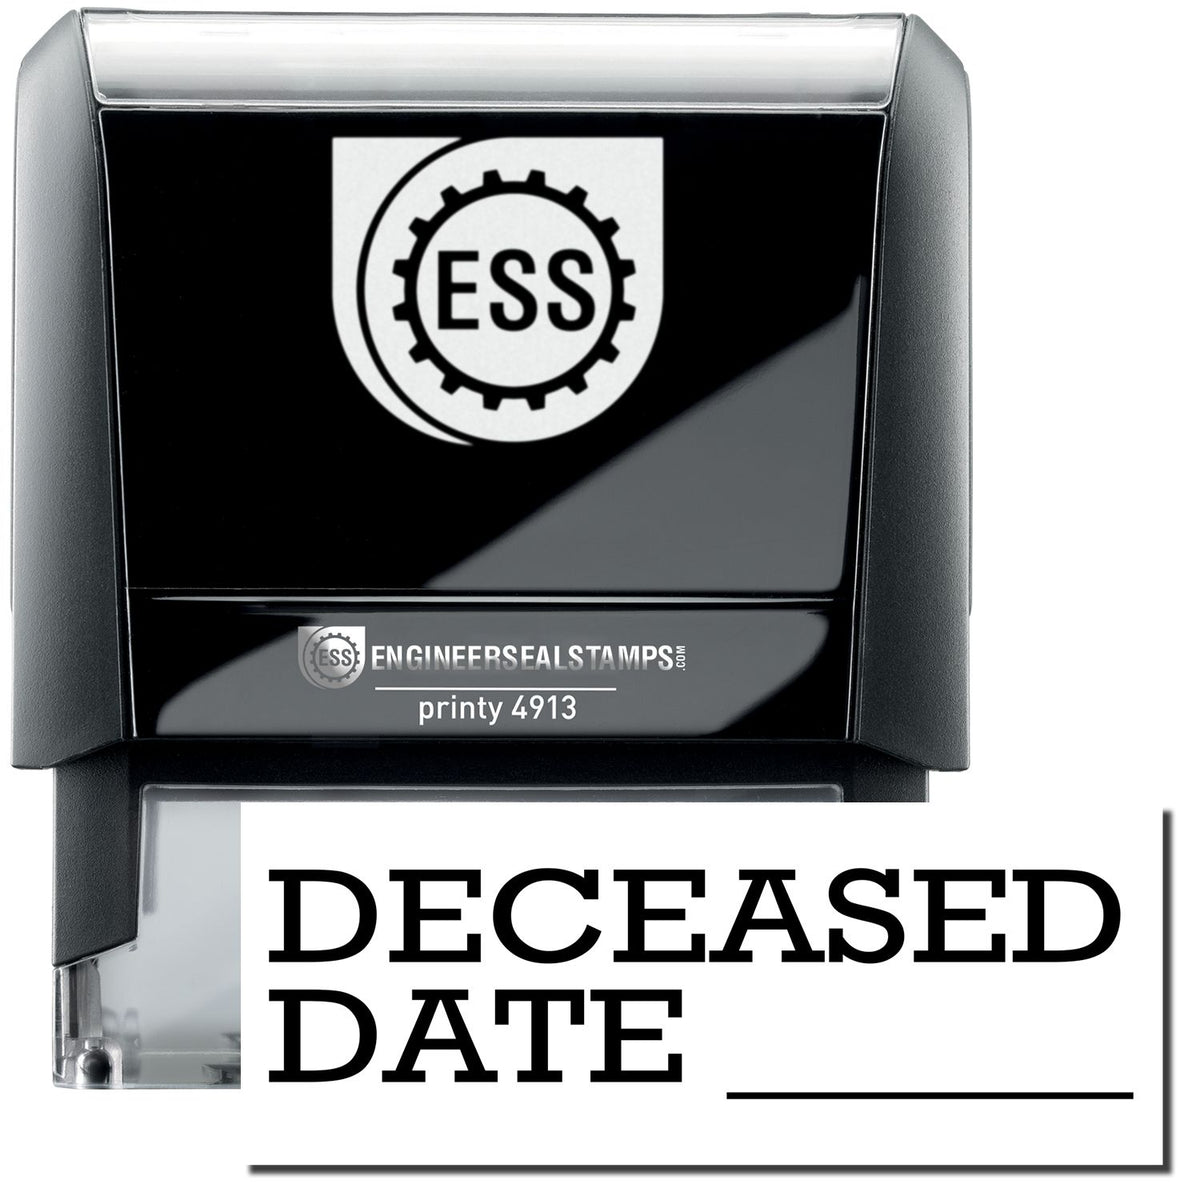 A self-inking stamp with a stamped image showing how the text &quot;DECEASED DATE&quot; in a large bold font is displayed by it with a dash where the date can be mentioned.